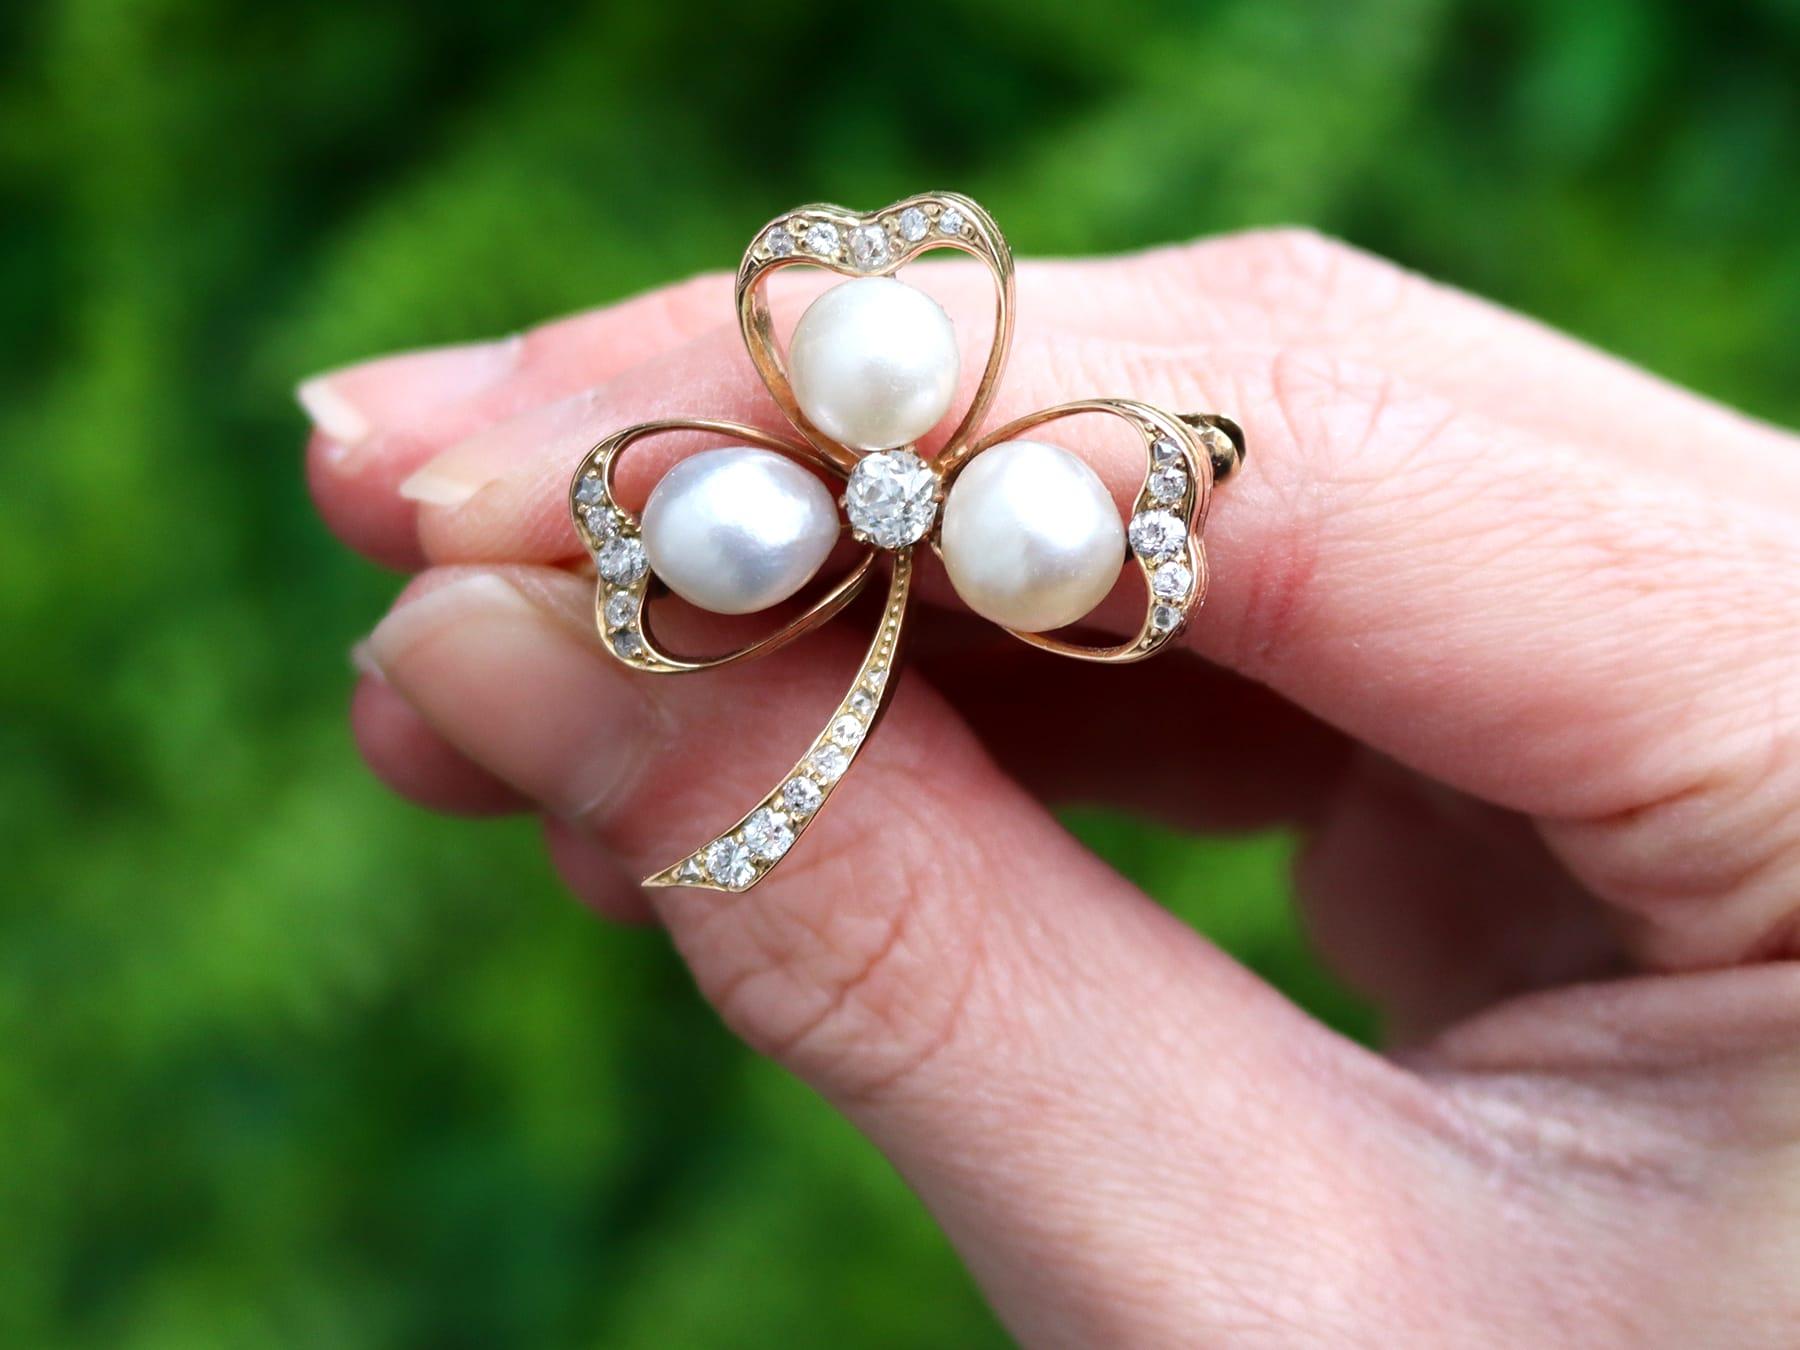 A stunning antique Victorian pearl and 1.05 carat diamond, 14 karat yellow gold brooch in the form of a 'clover'; part of our diverse antique jewelry and estate jewelry collections.

This stunning, fine and impressive antique brooch has been crafted